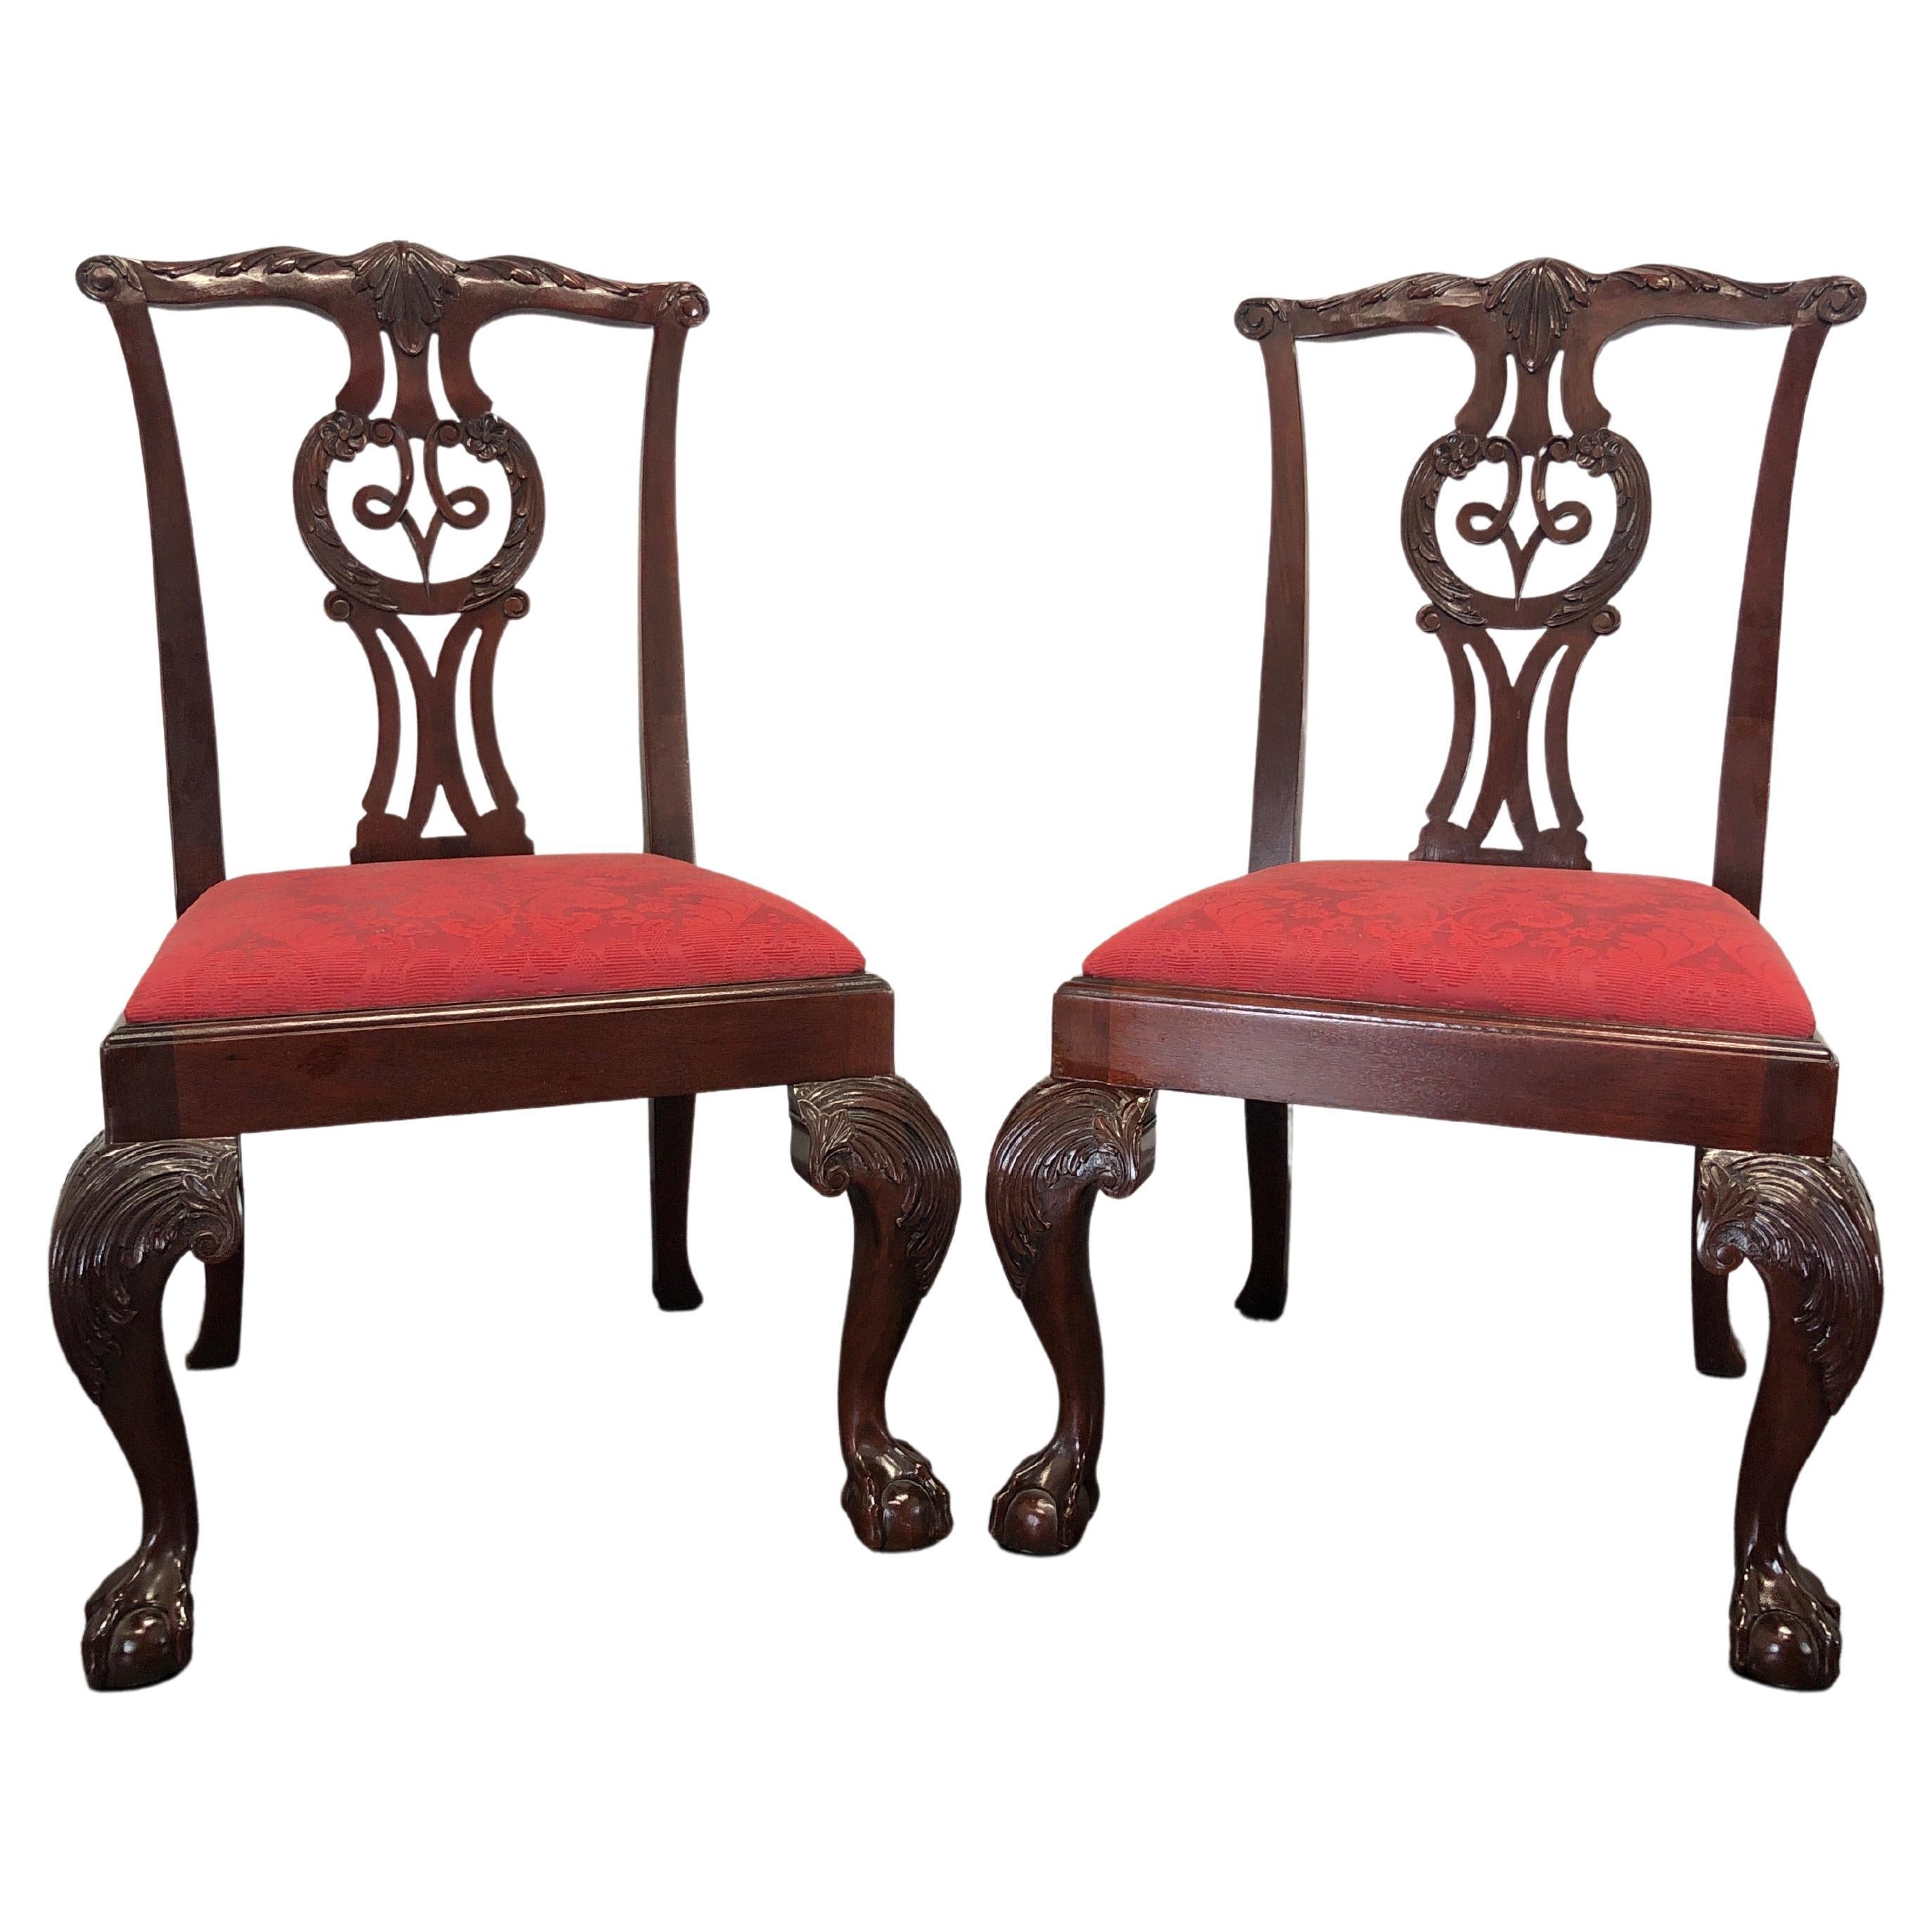 BAKER Chippendale Ball in Claw Mahogany Dining Side Chairs - Pair C